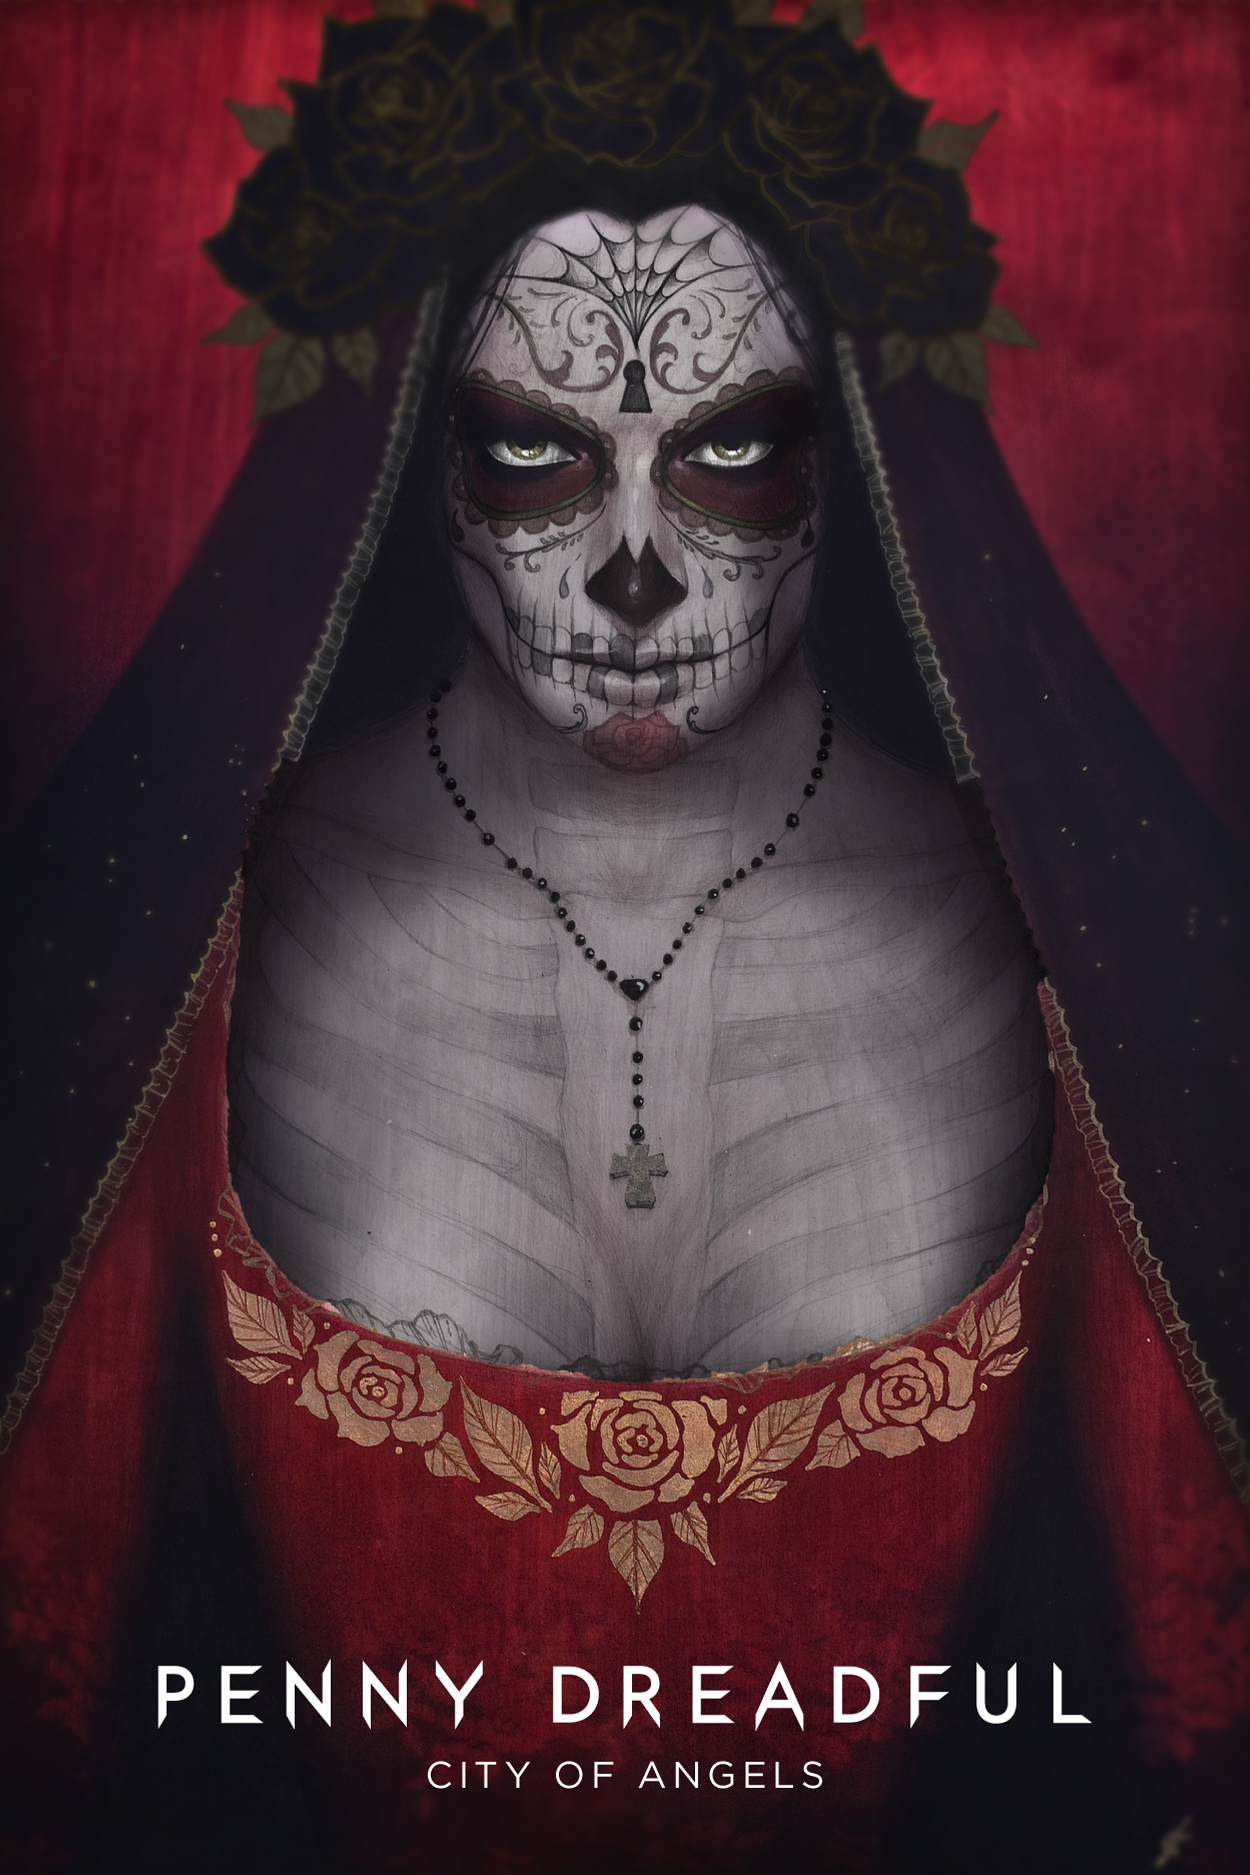 SHOWTIME ANNOUNCES PENNY DREADFUL: CITY OF ANGELS